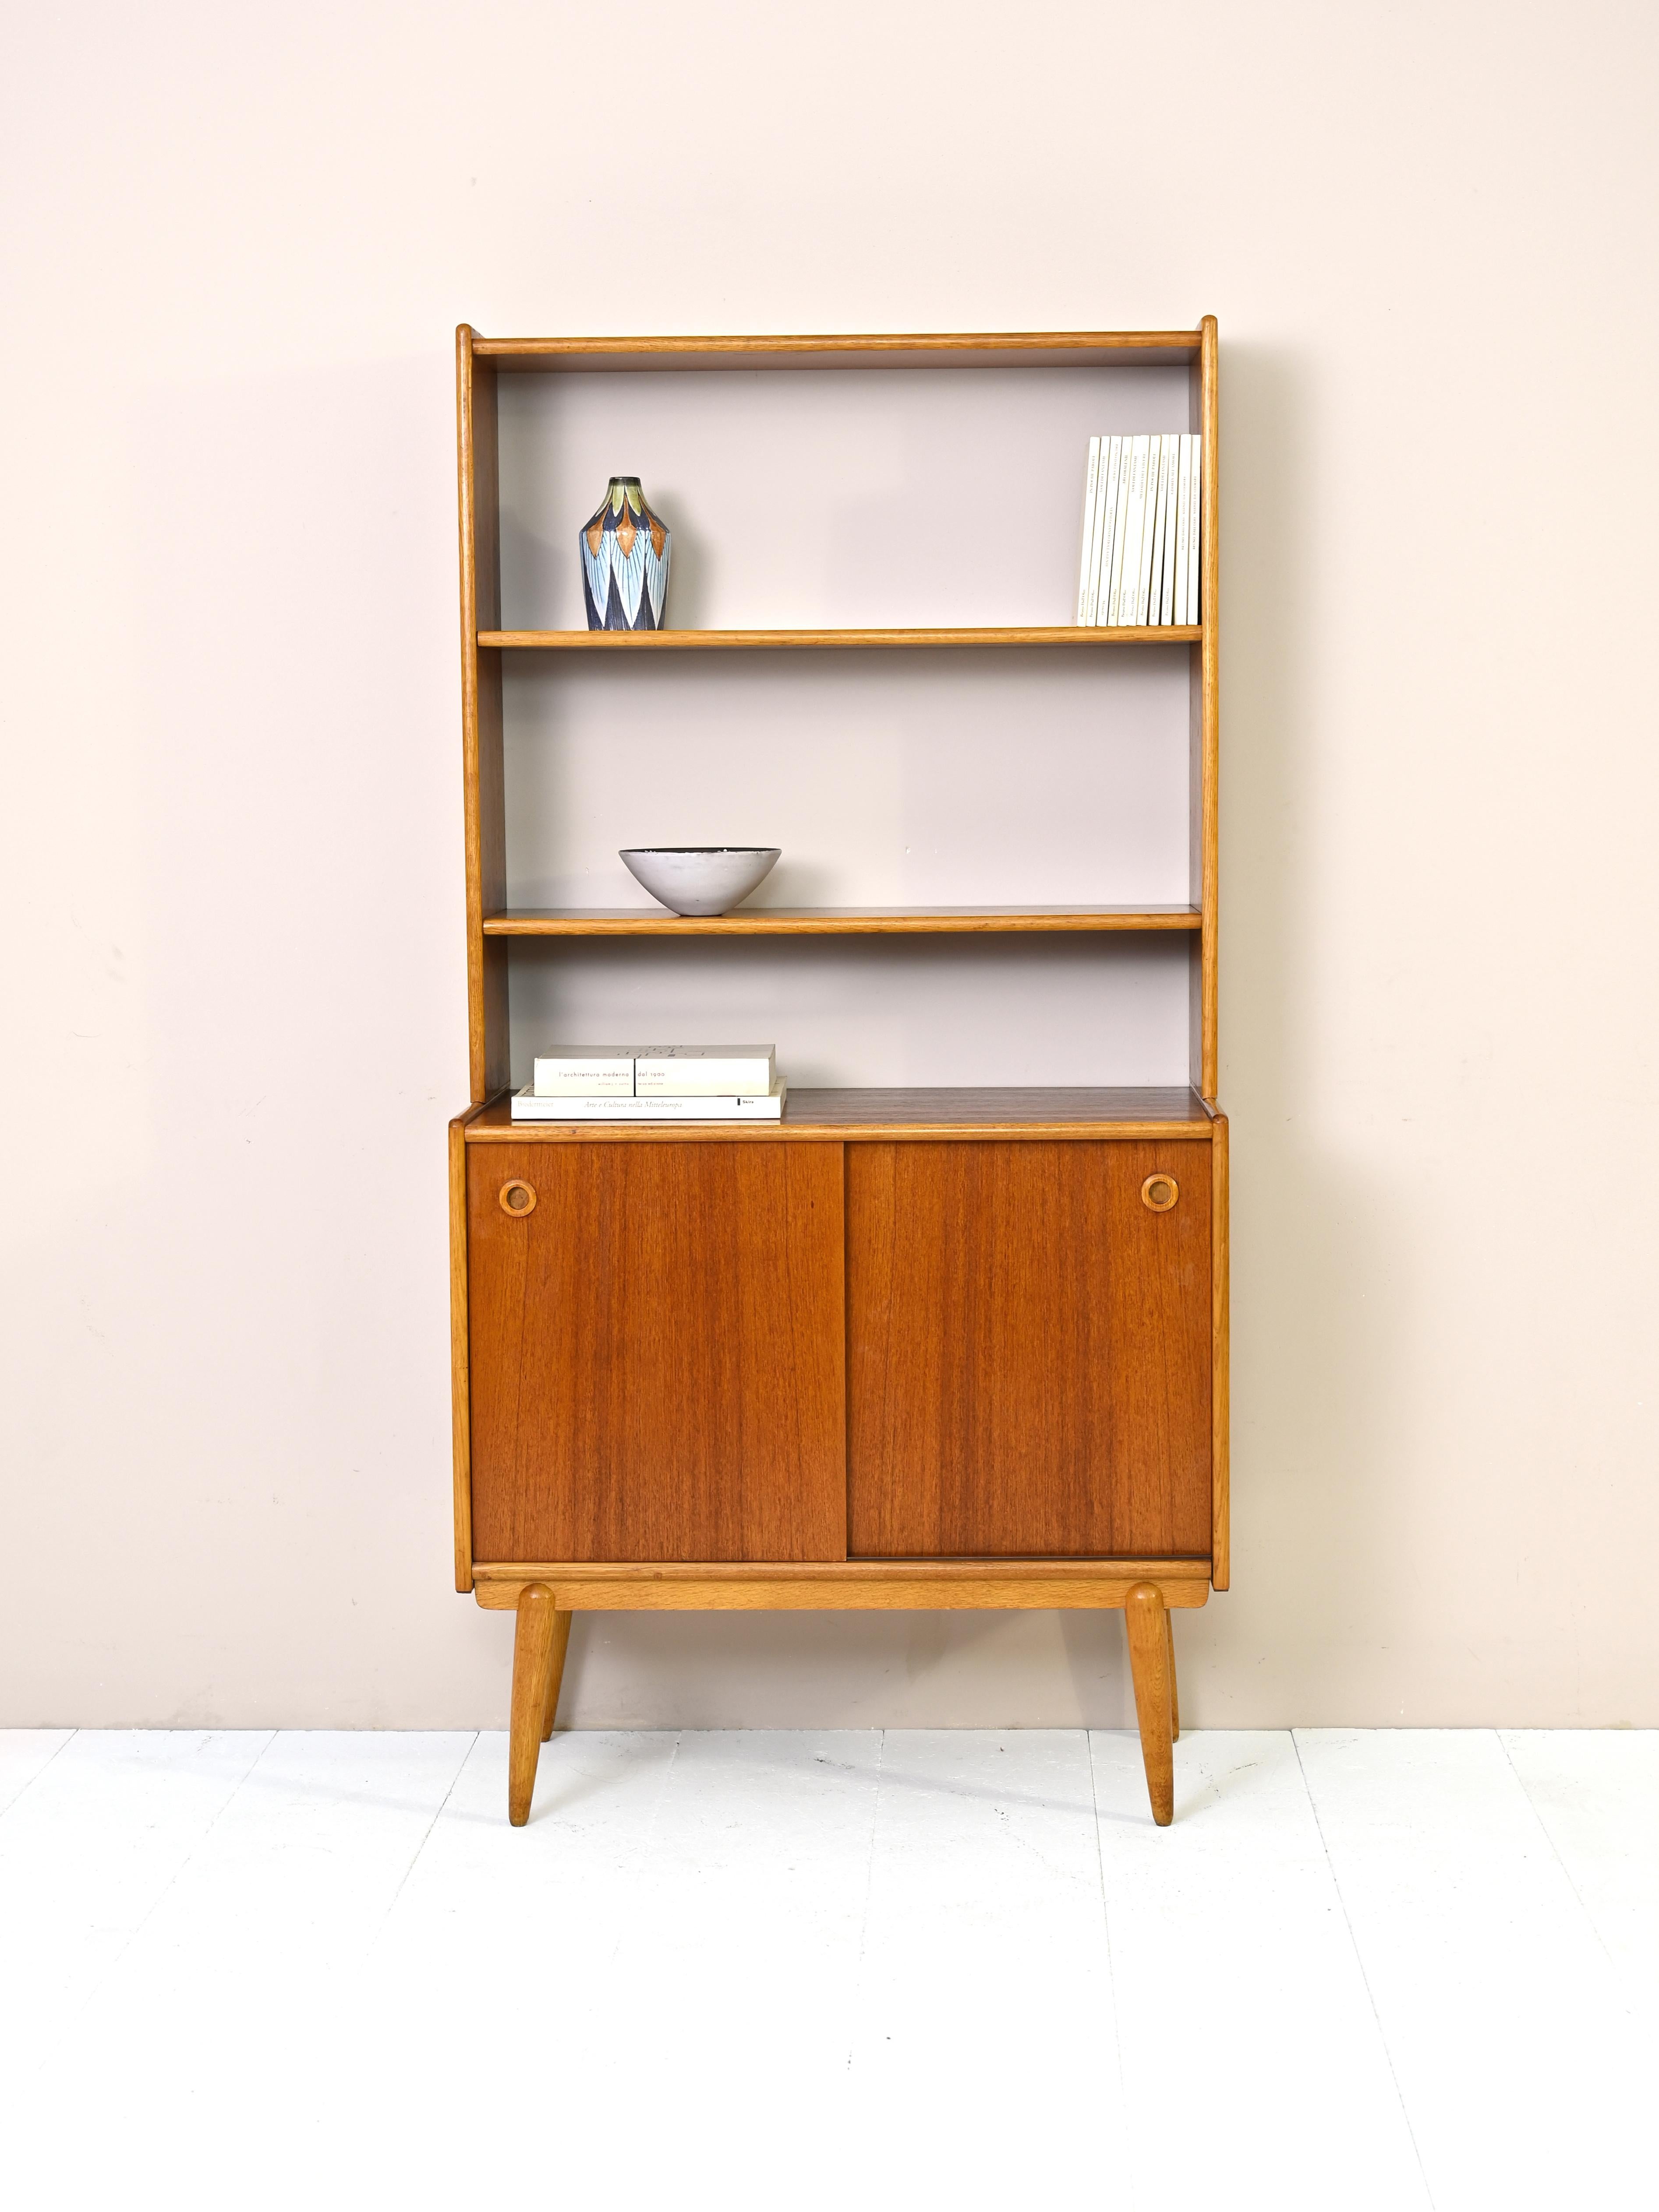 Original vintage teak furniture from Scandinavia, consisting of two parts. The upper part is a bookcase equipped with adjustable height shelves, the lower part is a cabinet with sliding doors.
An elegant and functional piece of furniture that can